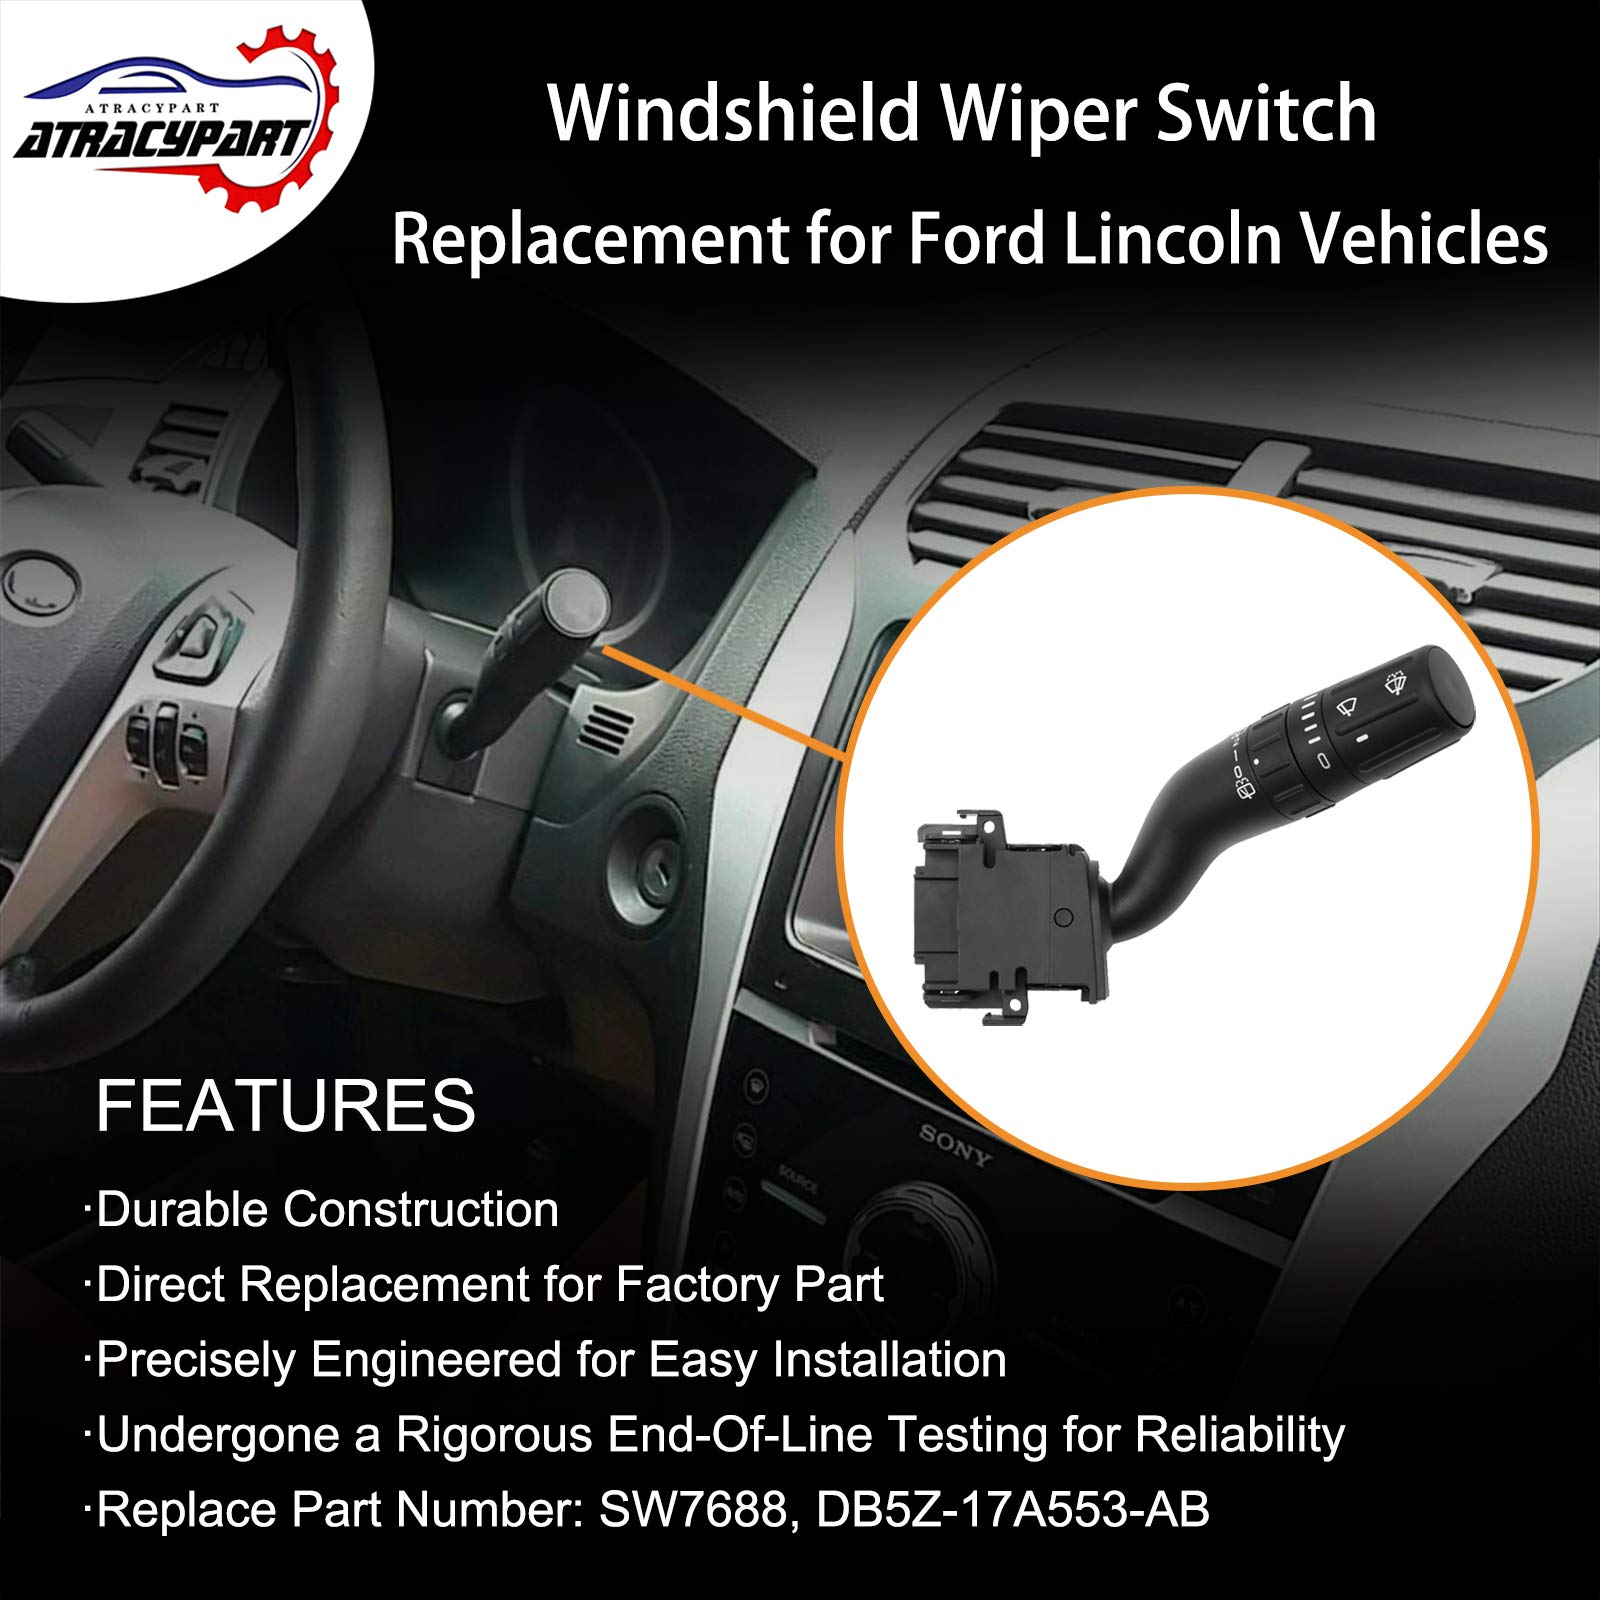 Windshield Wiper Switch | Replacement for 2011-2019 Ford Explorer, 2011-2015 Ford Edge, 2013-2018 Ford Police Interceptor Utility, 2011-2017 Lincoln MKX | Replaces# SW7688, DB5Z-17A553-AB